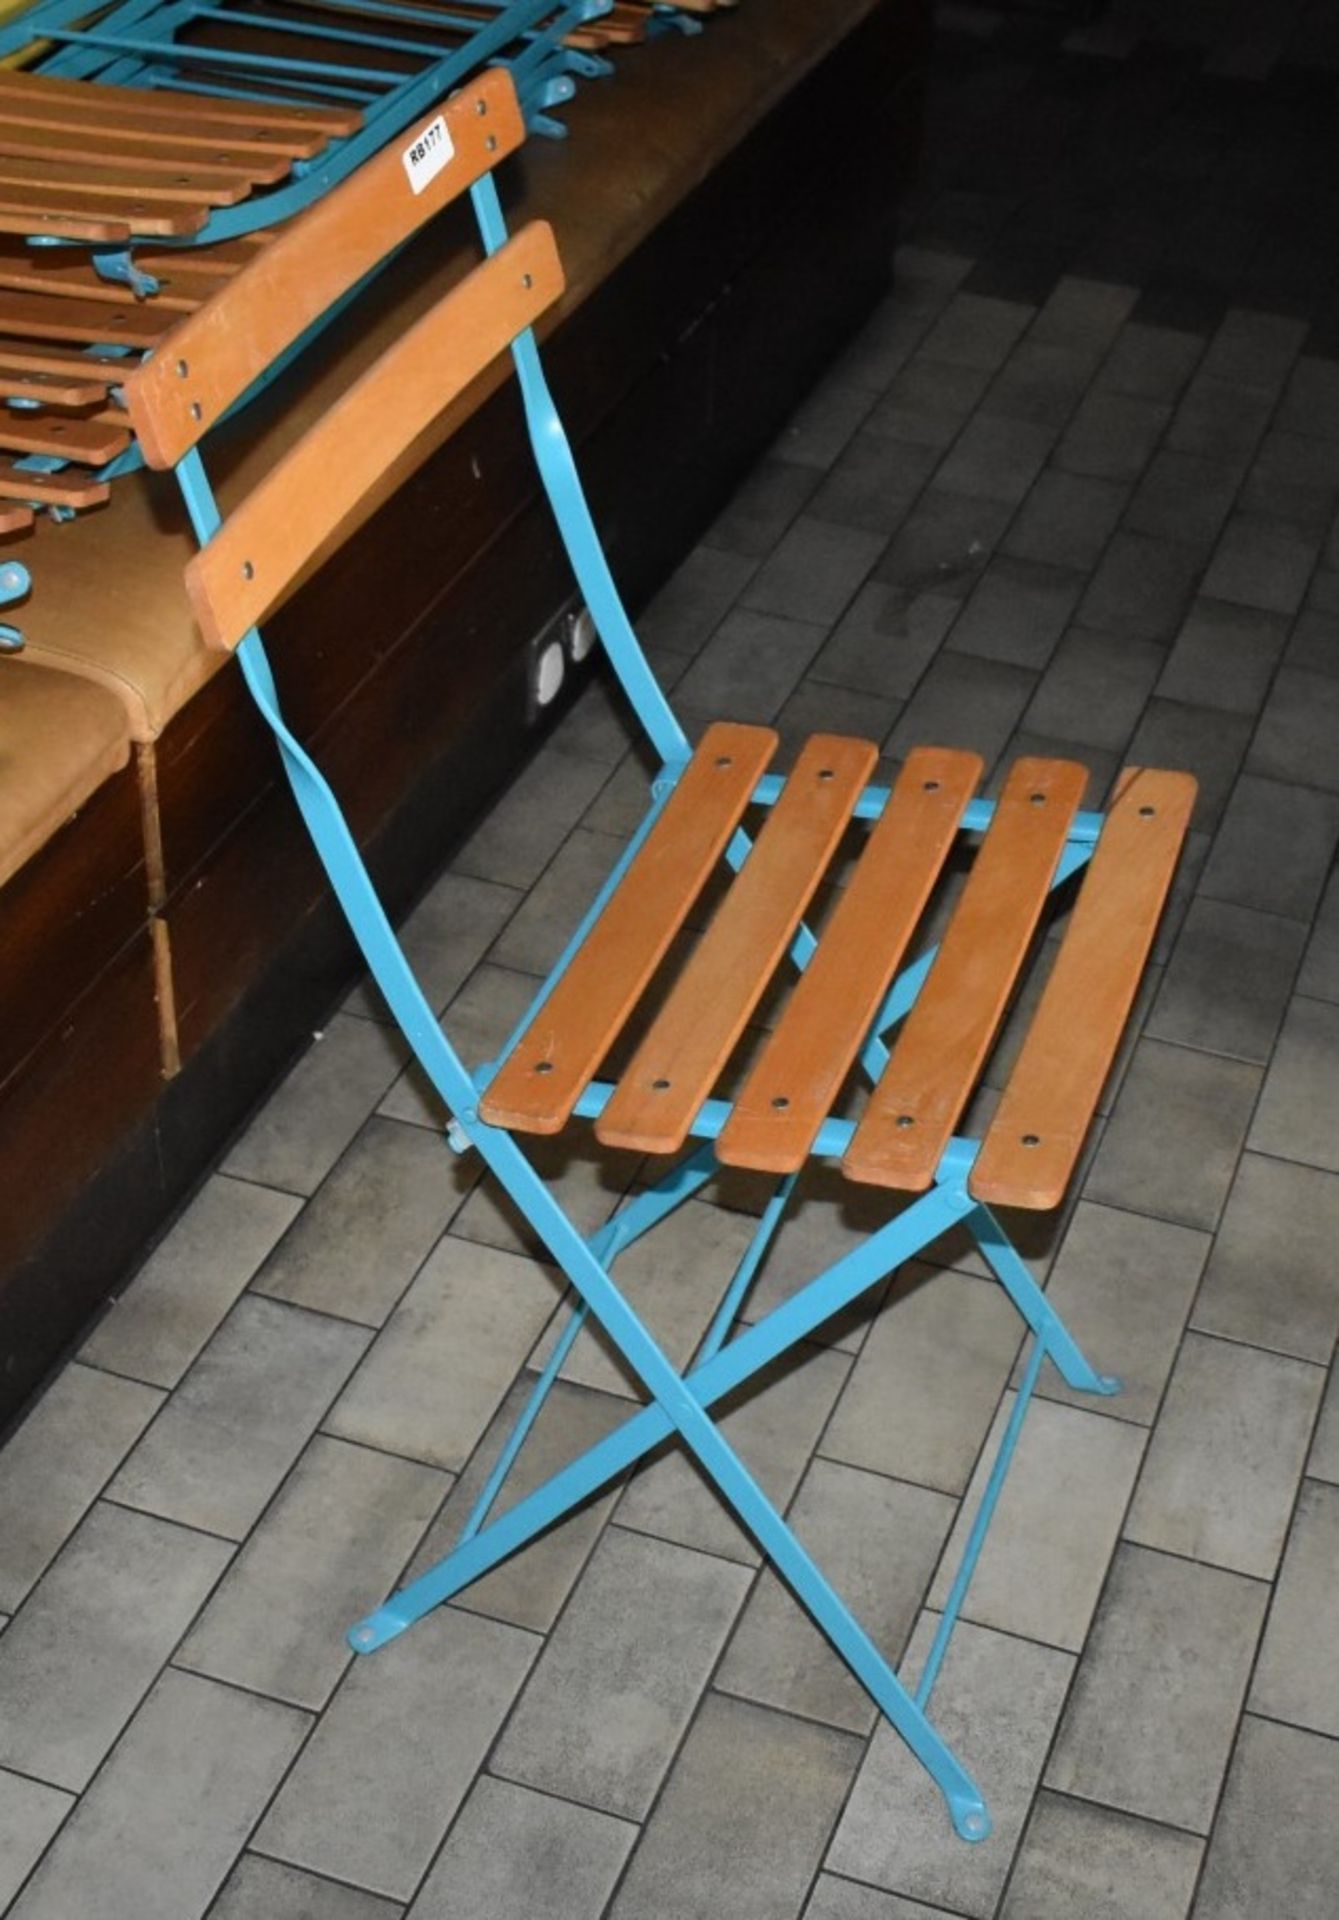 6 x Outdoor Folding Chairs in Blue With Wood Seats and Backrests - Unused - Ref: RB177 - CL558 - - Image 3 of 5